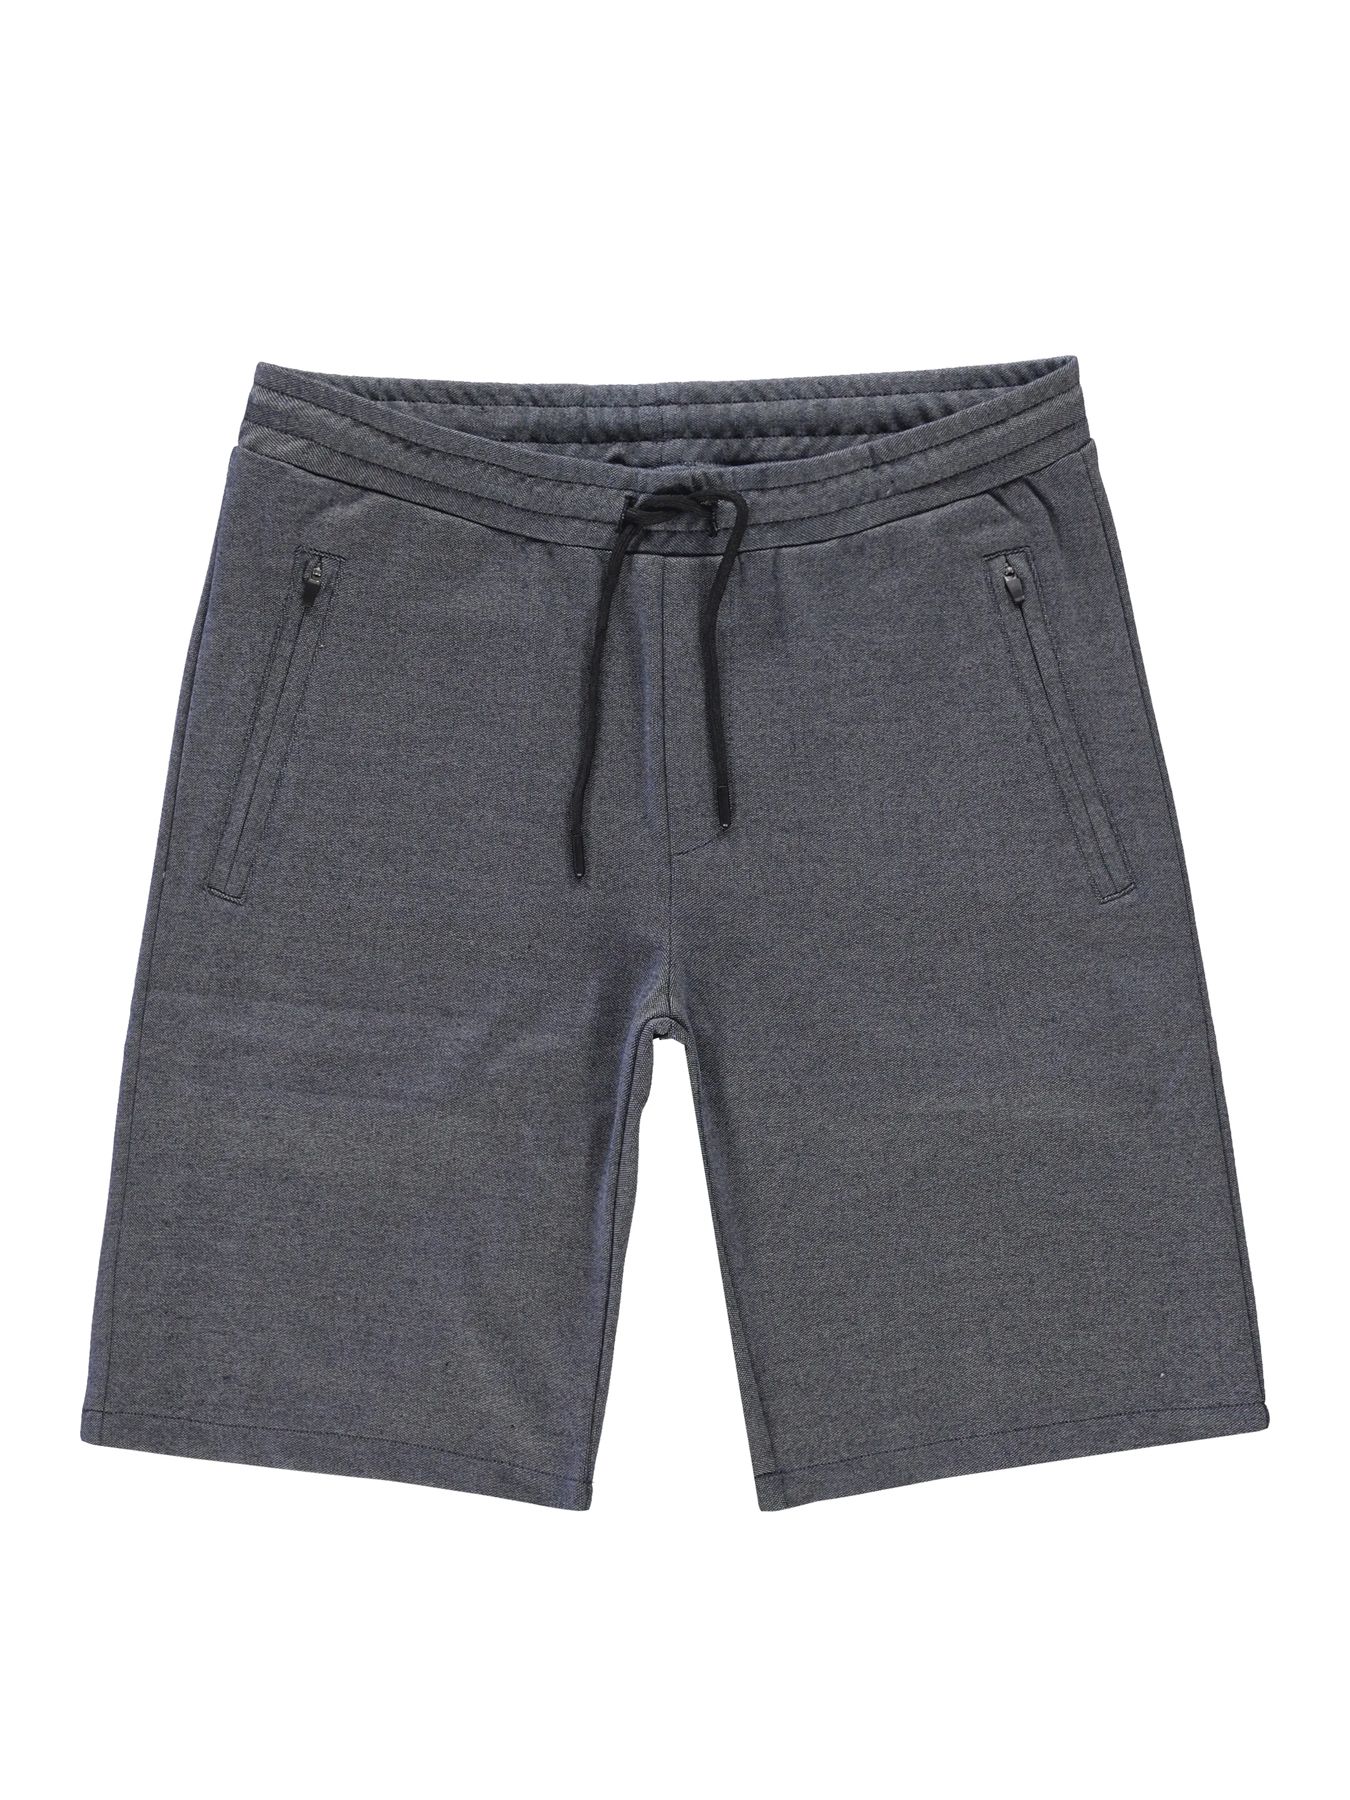 Cars jeans Short Herell 01 12 navy 2900140192031